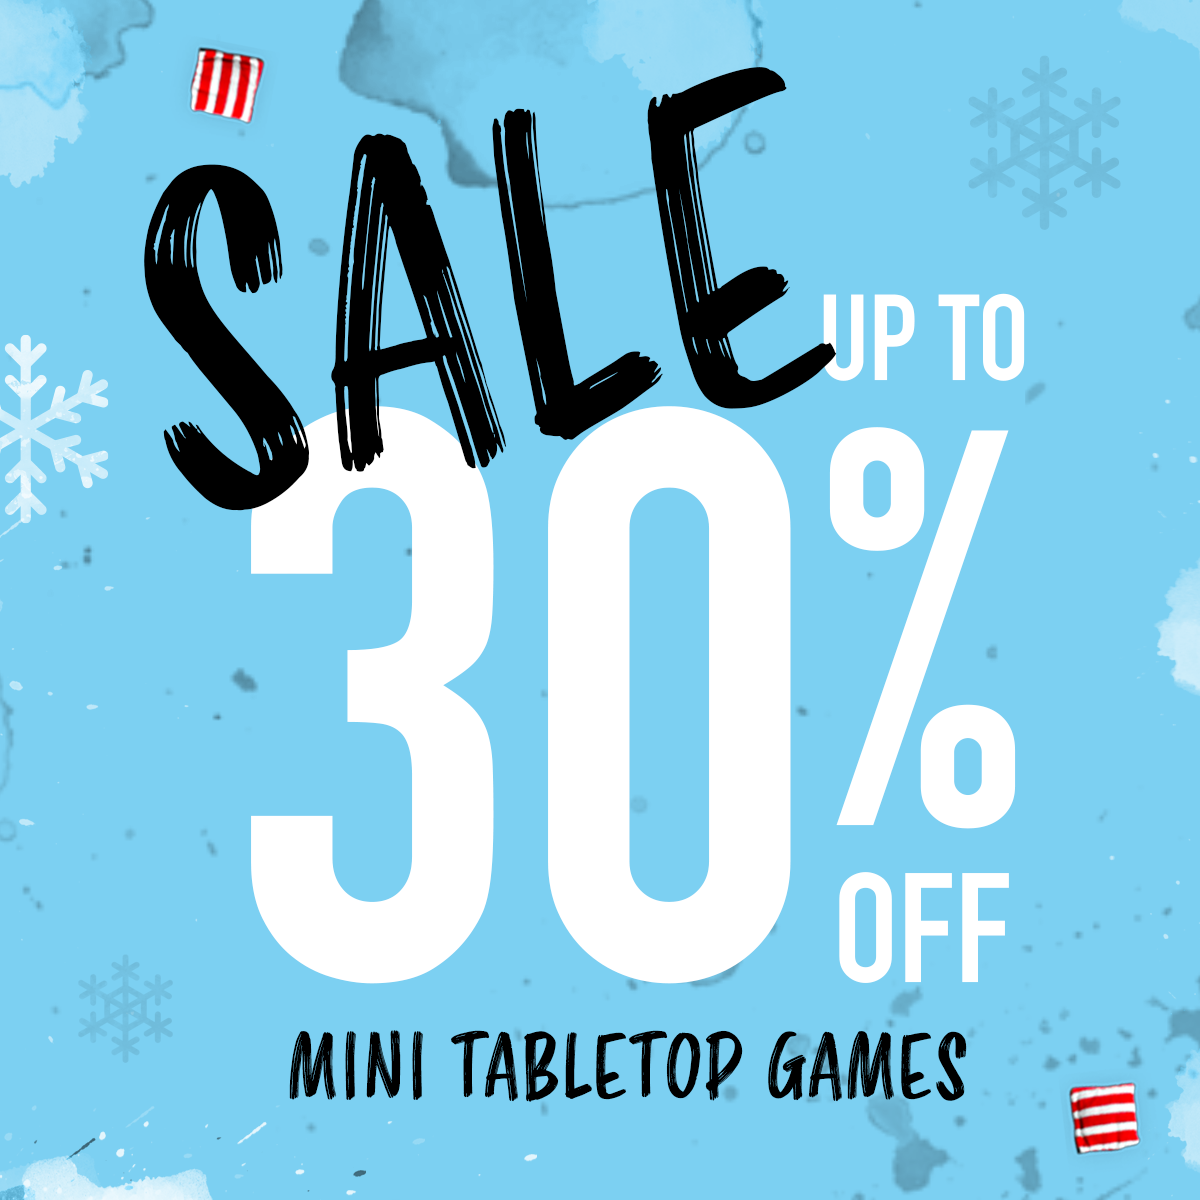 Save up to 30% on Mini Tabletop Games